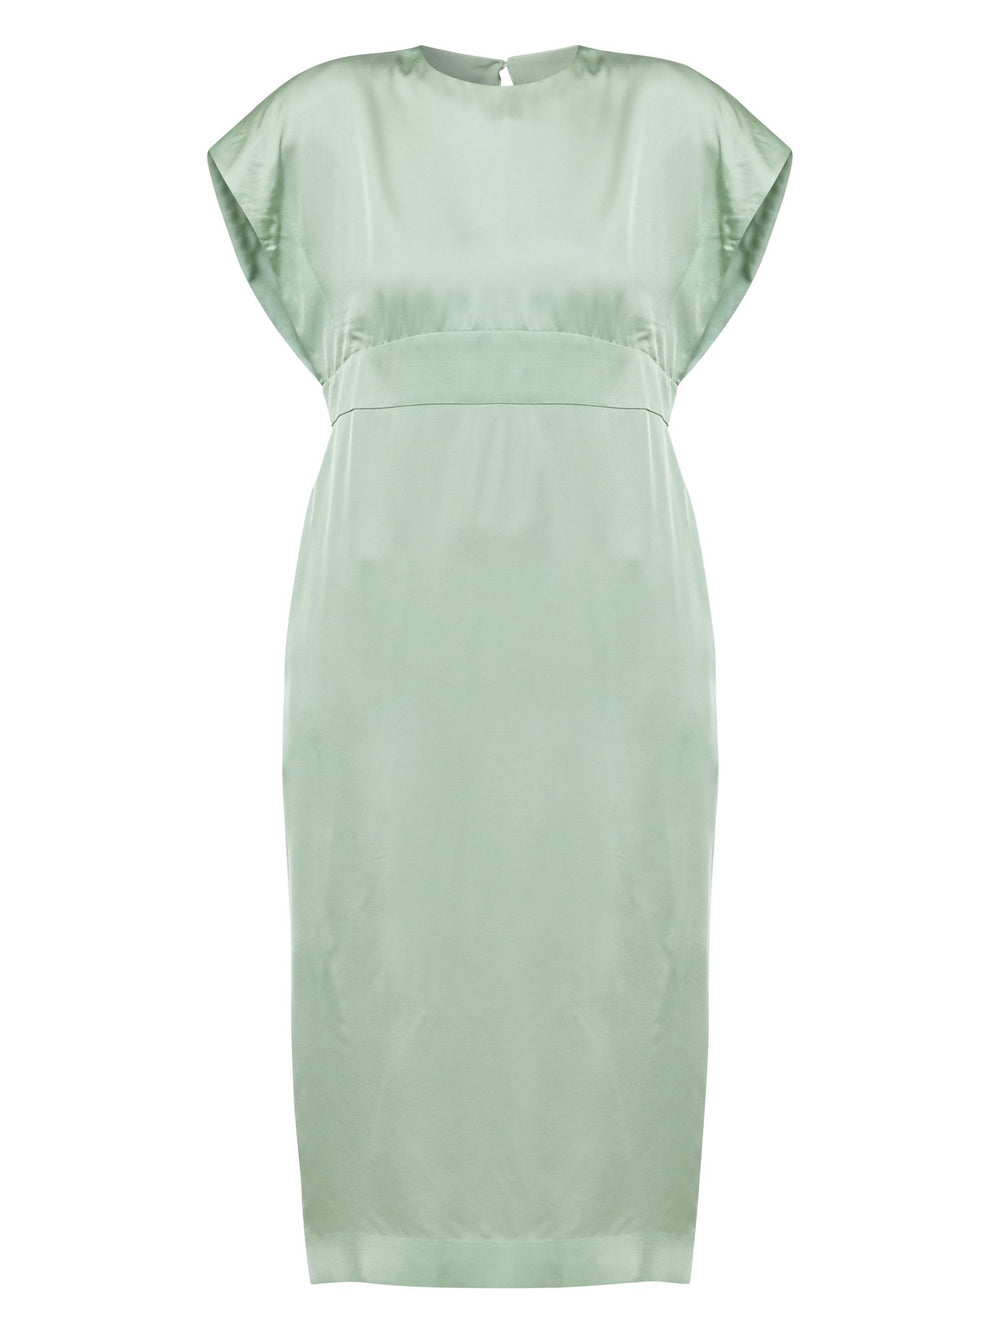 Classic occasion wear, modernized. Meet the Shiv dress in luxurious tea green satin viscose. An easy-fitting silhouette that falls to the mid-calf and features side slit, pockets, and an elegant key-hole back neck detail. . Attending a summer wedding? Mother of the bride? Heading to the races? This is the dress for you. Designed in Ireland by Helen McAlinden. Made in Europe. Free shipping to the EU & UK.